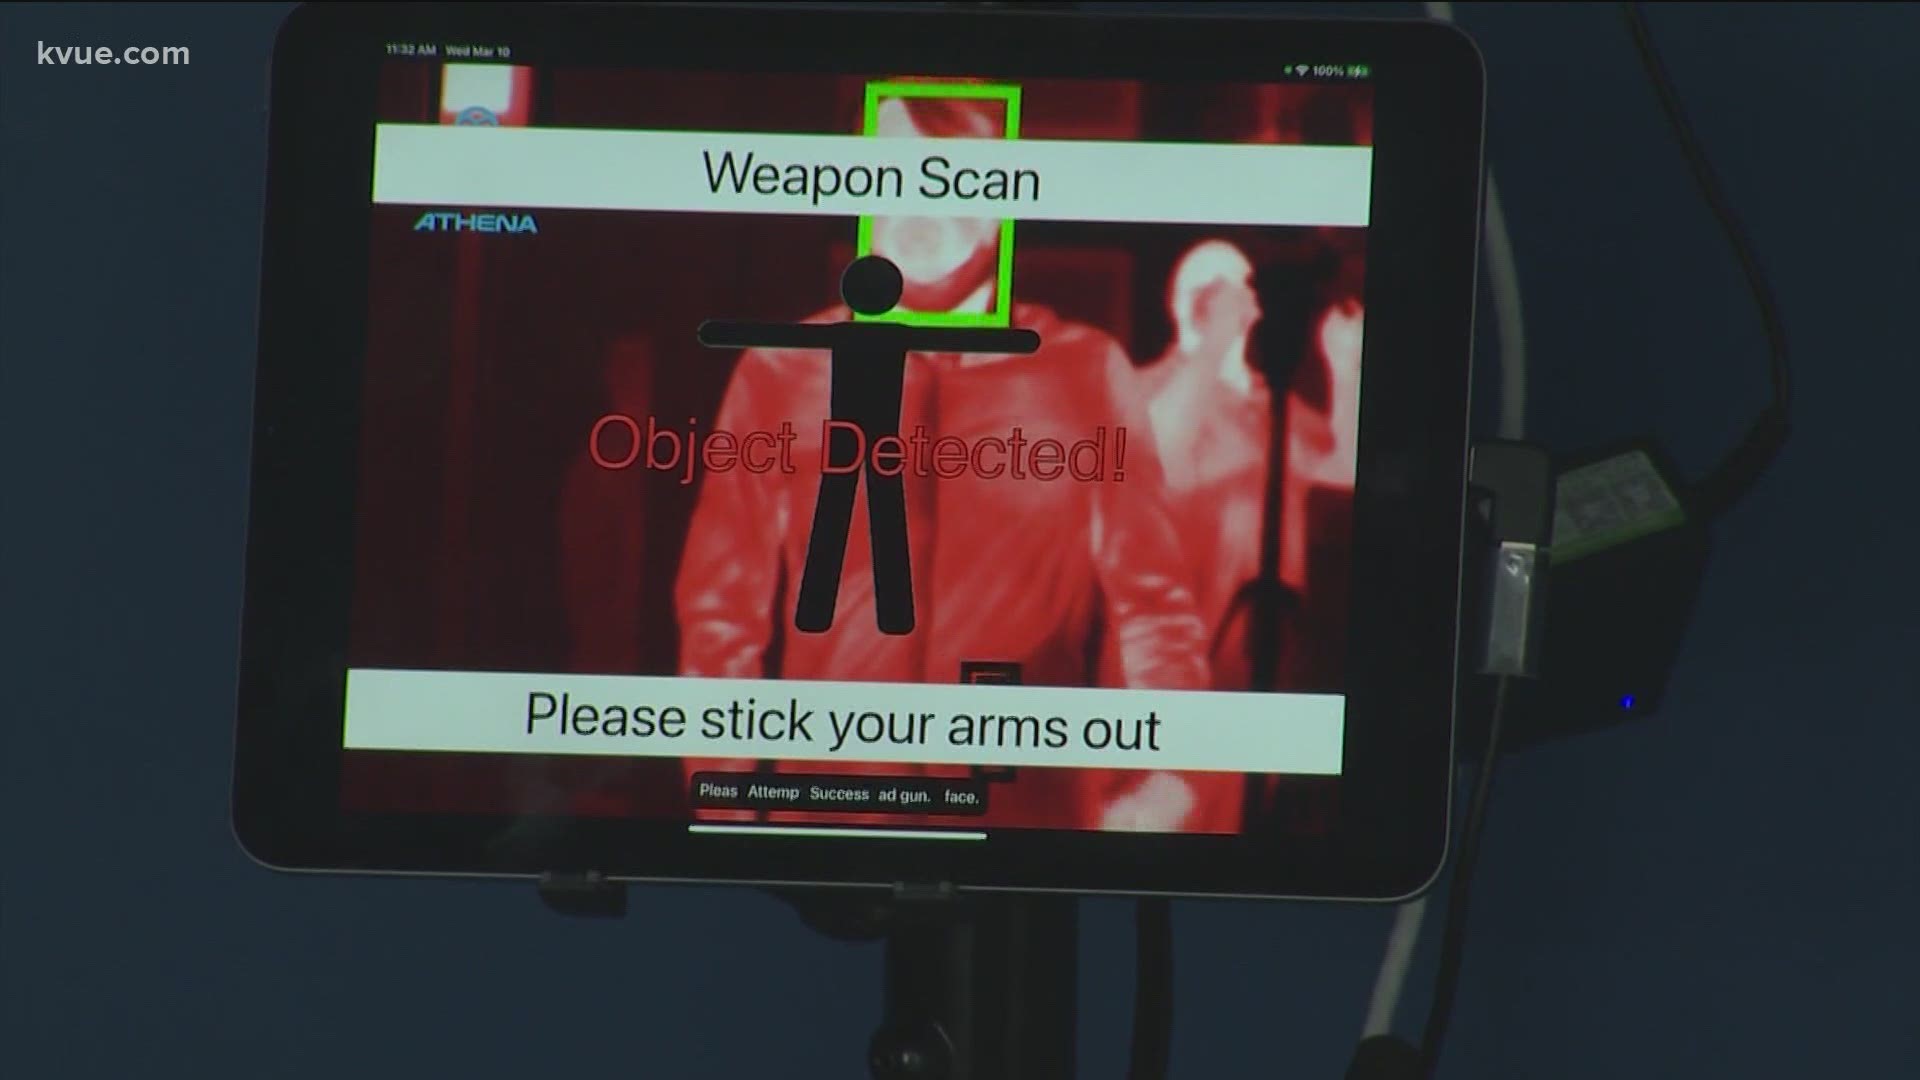 One Austin-based tech company is working to try to make workplaces safer. KVUE's Bryce Newberry has a look at the high tech that aims to make a difference.